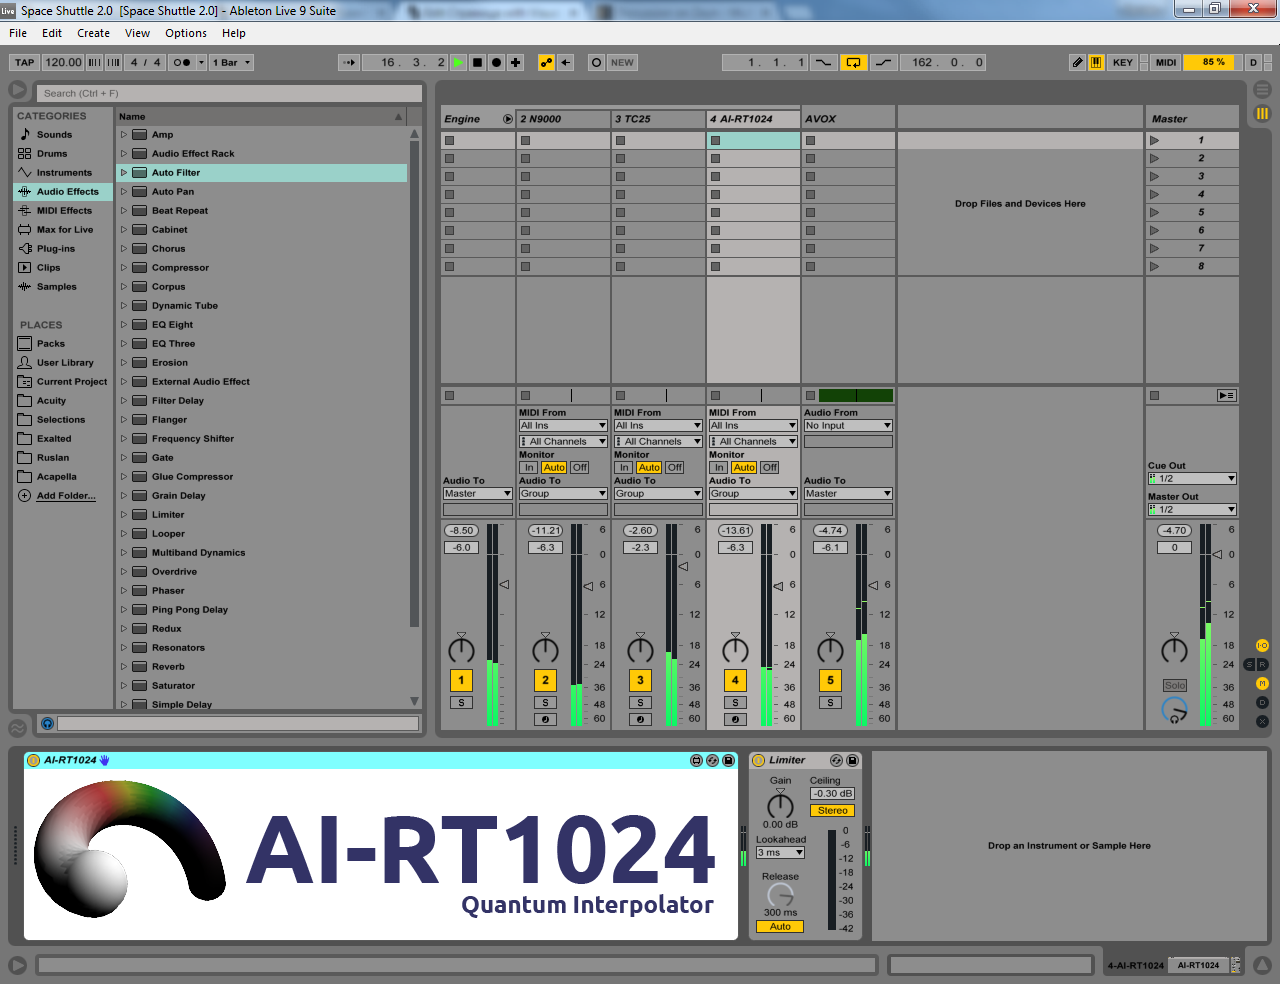 AI-RT1024 in Ableton